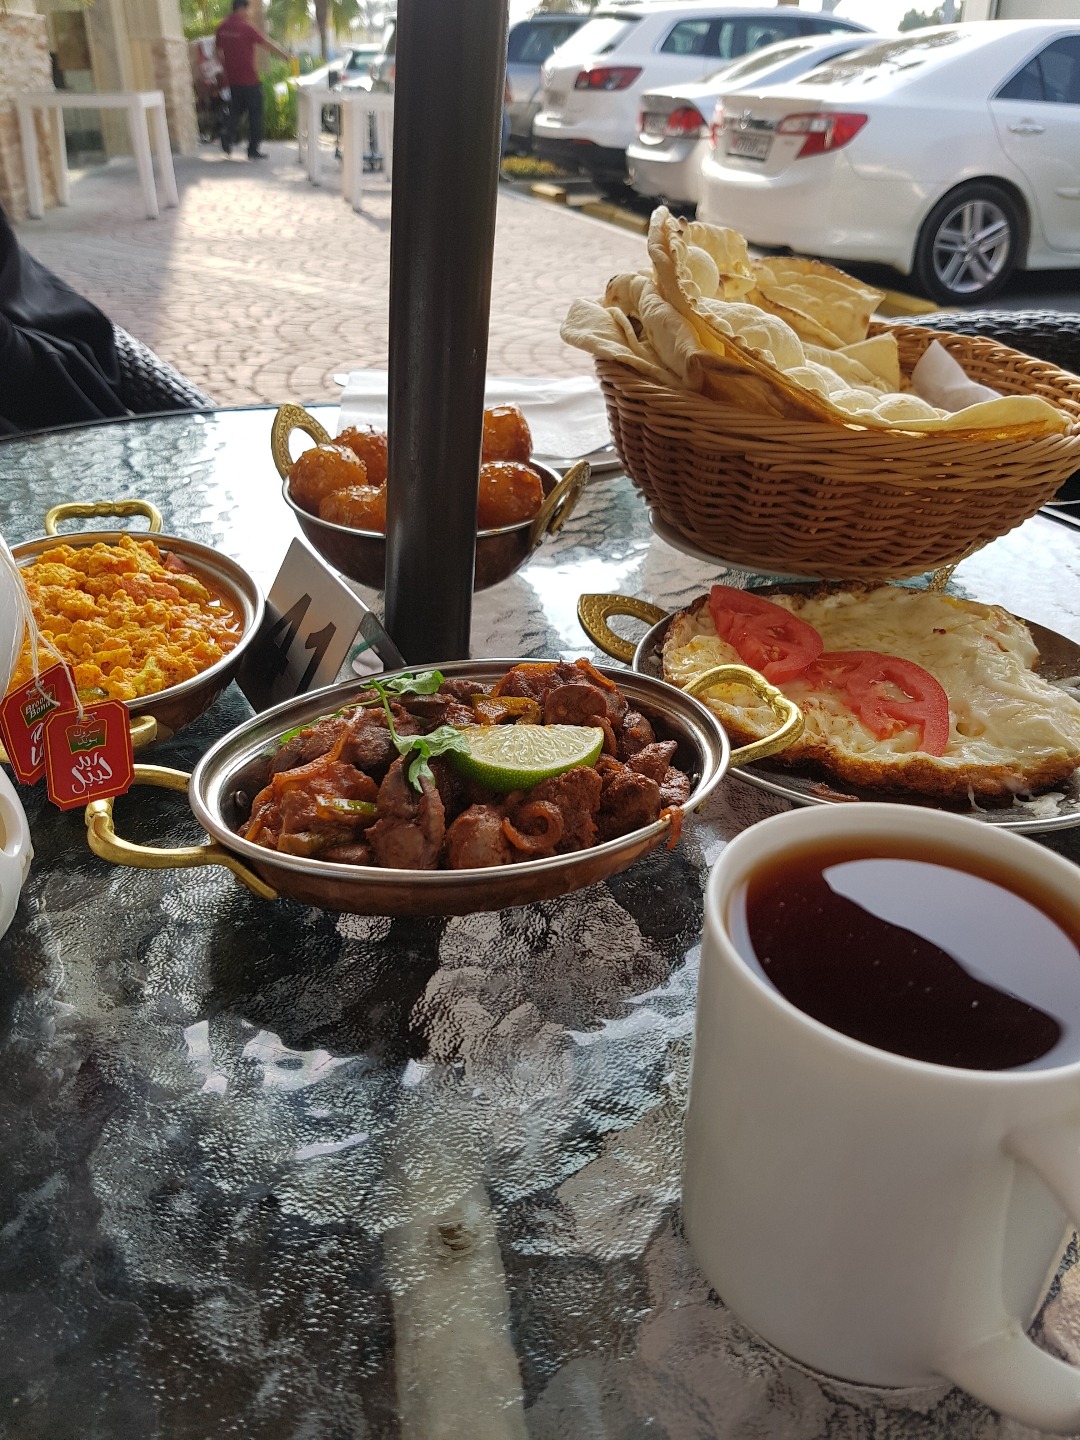 Nice breakfast. 
the chicken liver was extra delicious.
the shakshoka and sunny side egg with cheese and loghaymat also was great.
the service sooo bad
the waiters so rude @ مطعم الأمير - البحرين